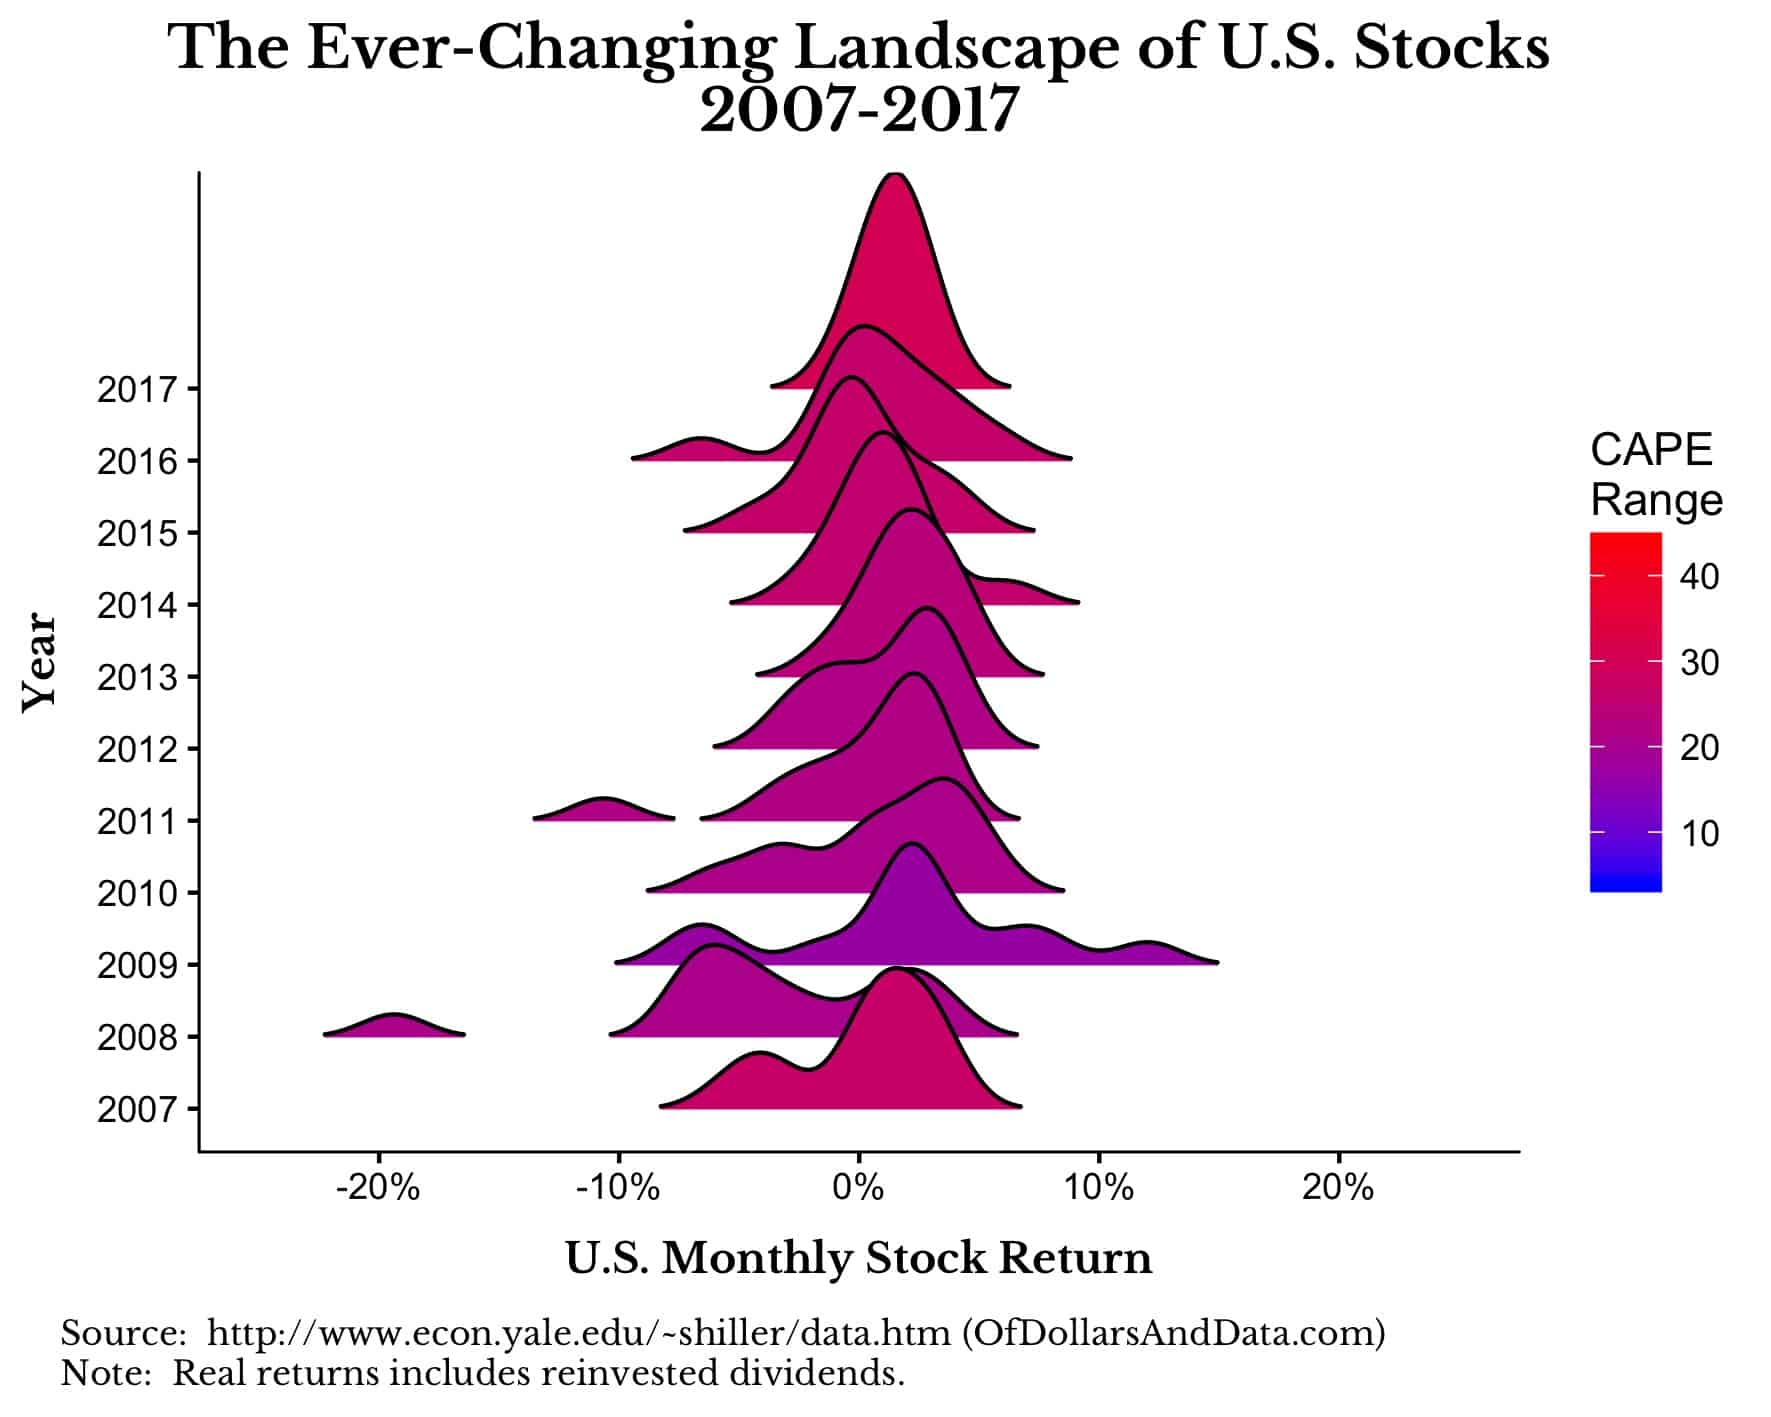 US Stock monthly return distribution by year 2007-2017